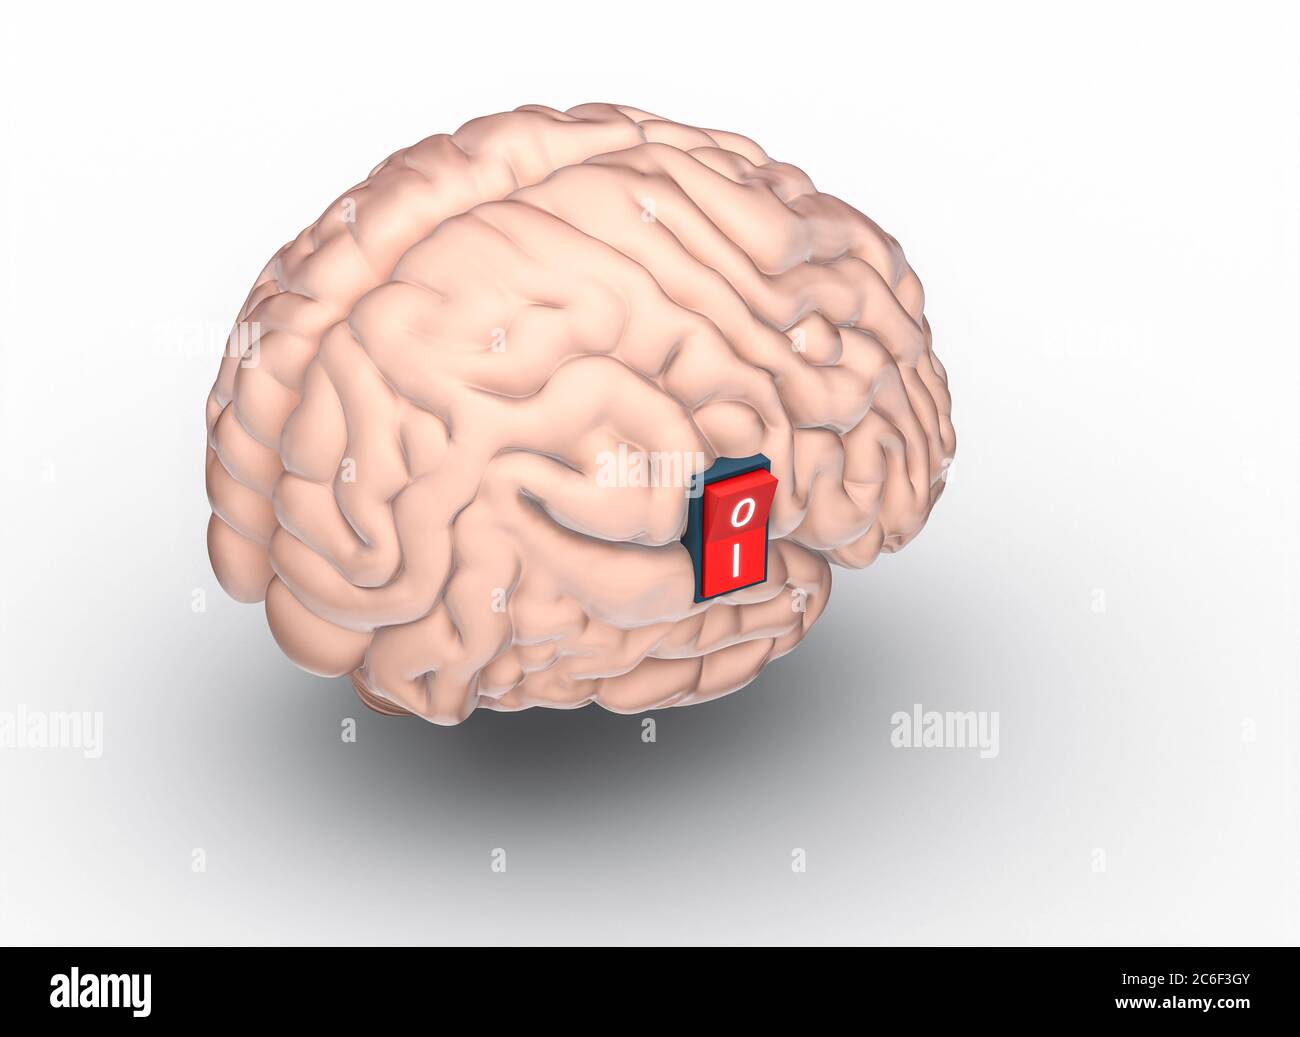 3d model render of a human brain with switch to turn it on. Stock Photo